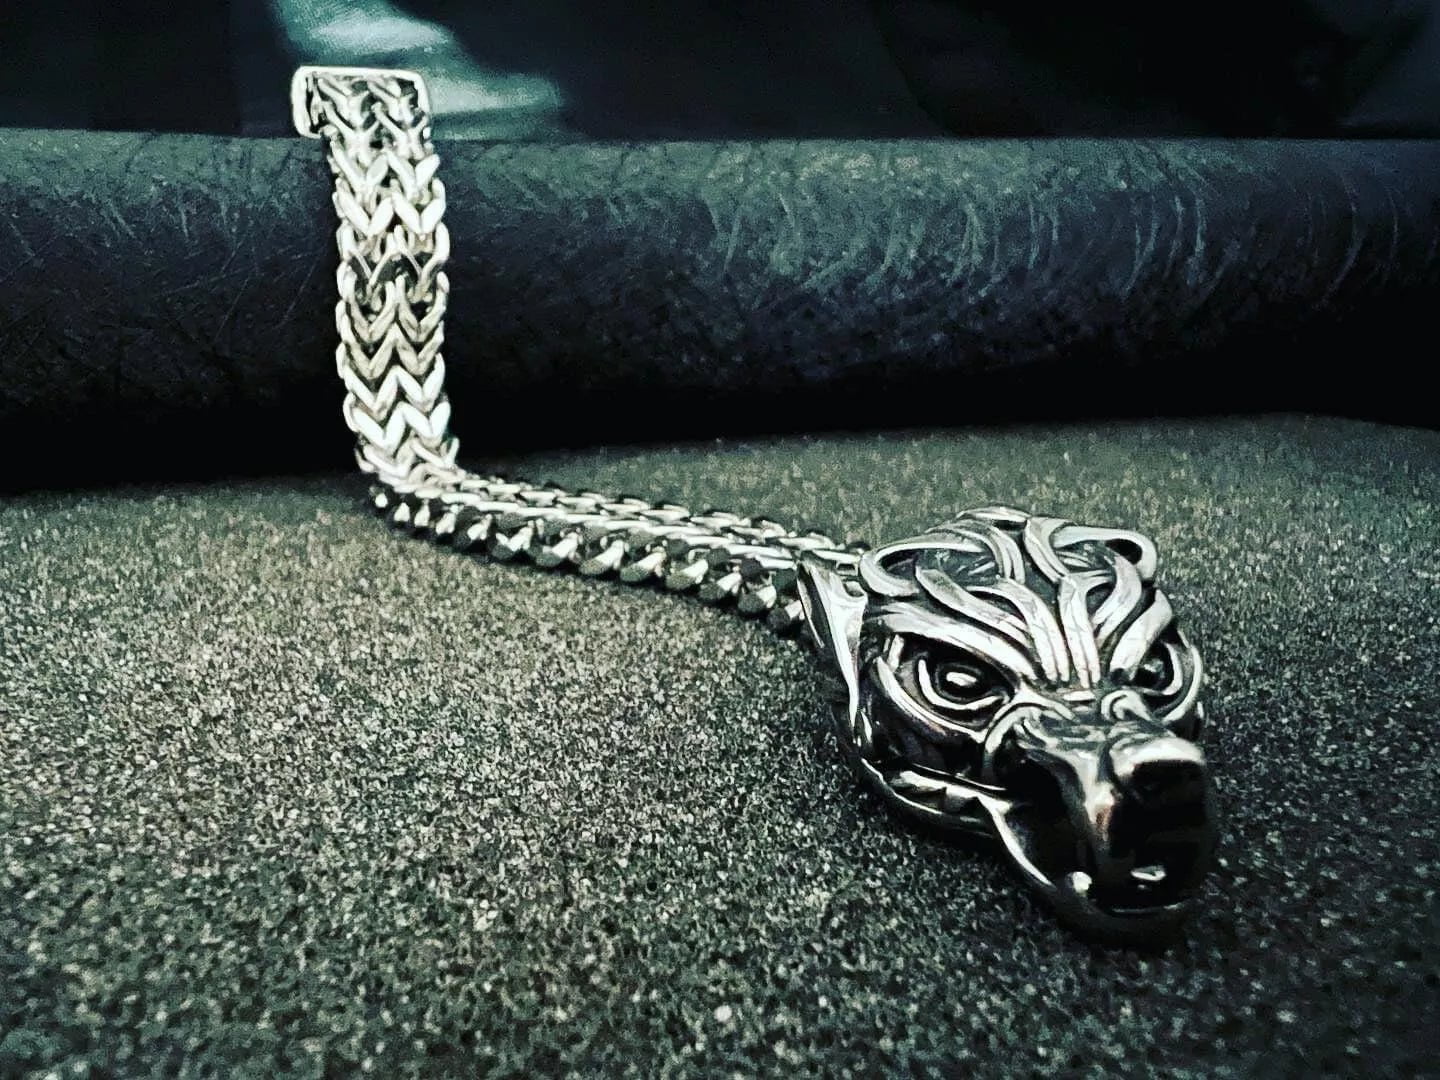 THE MEN THING 12mm Pure Stainless Steel Viking Bracelet, American trending Style - Viking Arm Rings, Norse Bracelet with Wolf Head for Men & Boys (8inch)